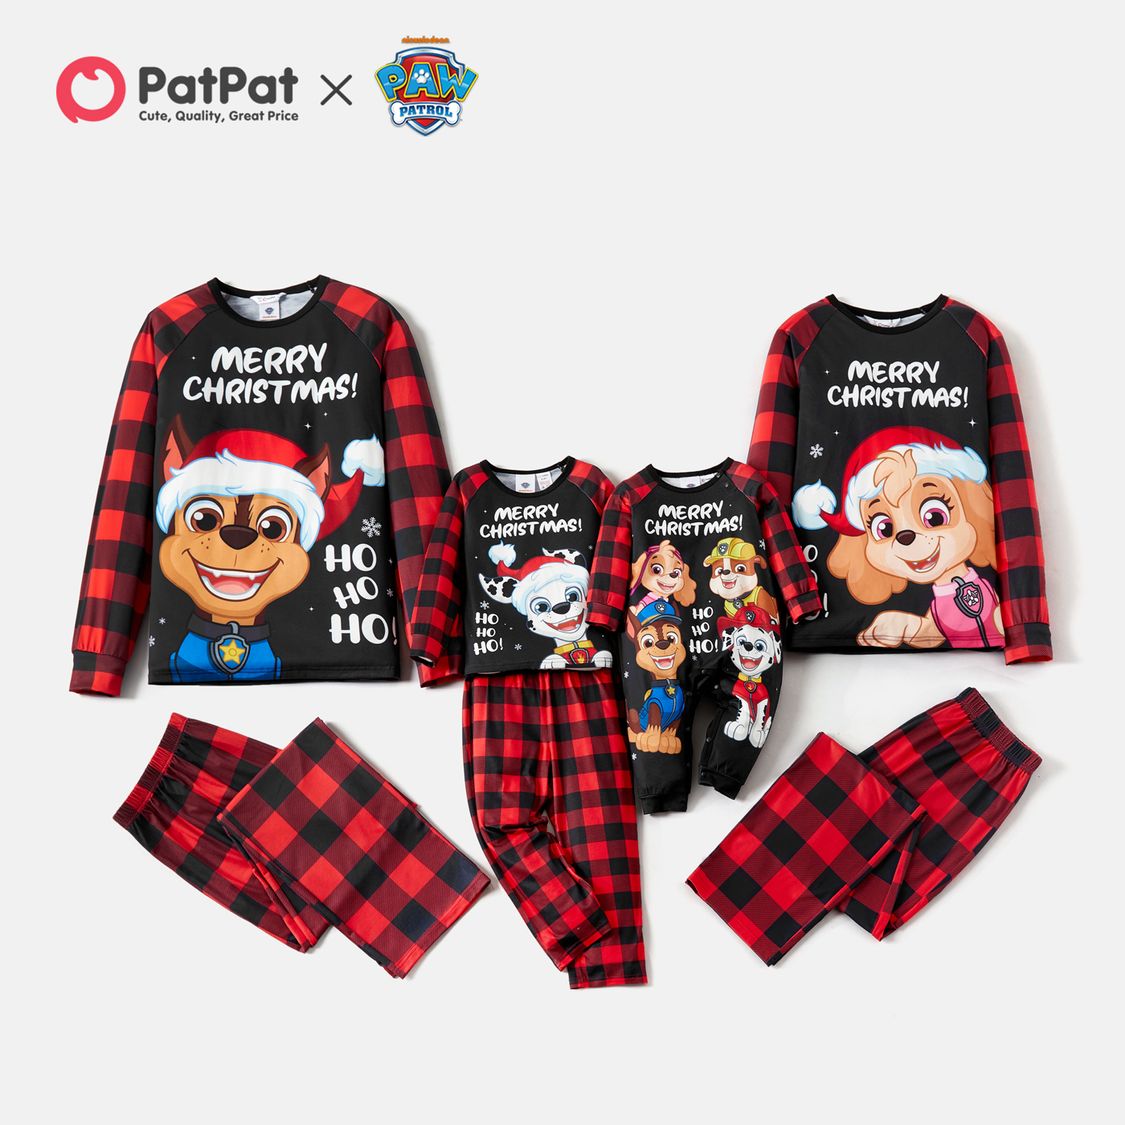 Buy Matching outfits Clothes Online for Sale PatPat Mobile